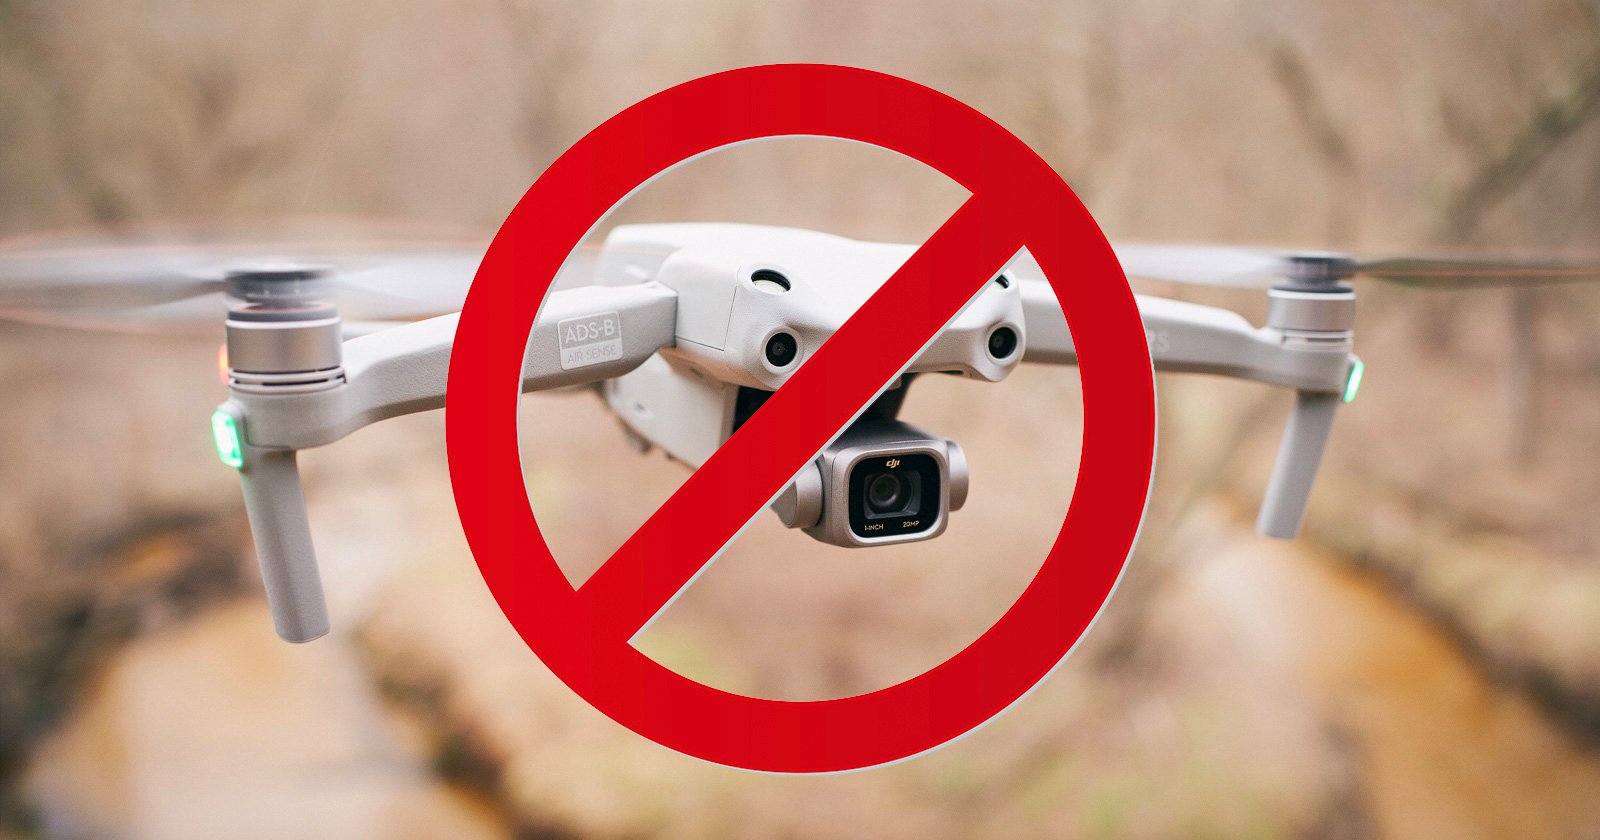 Top FCC Official Calls For Ban of DJI Drones Citing National Security